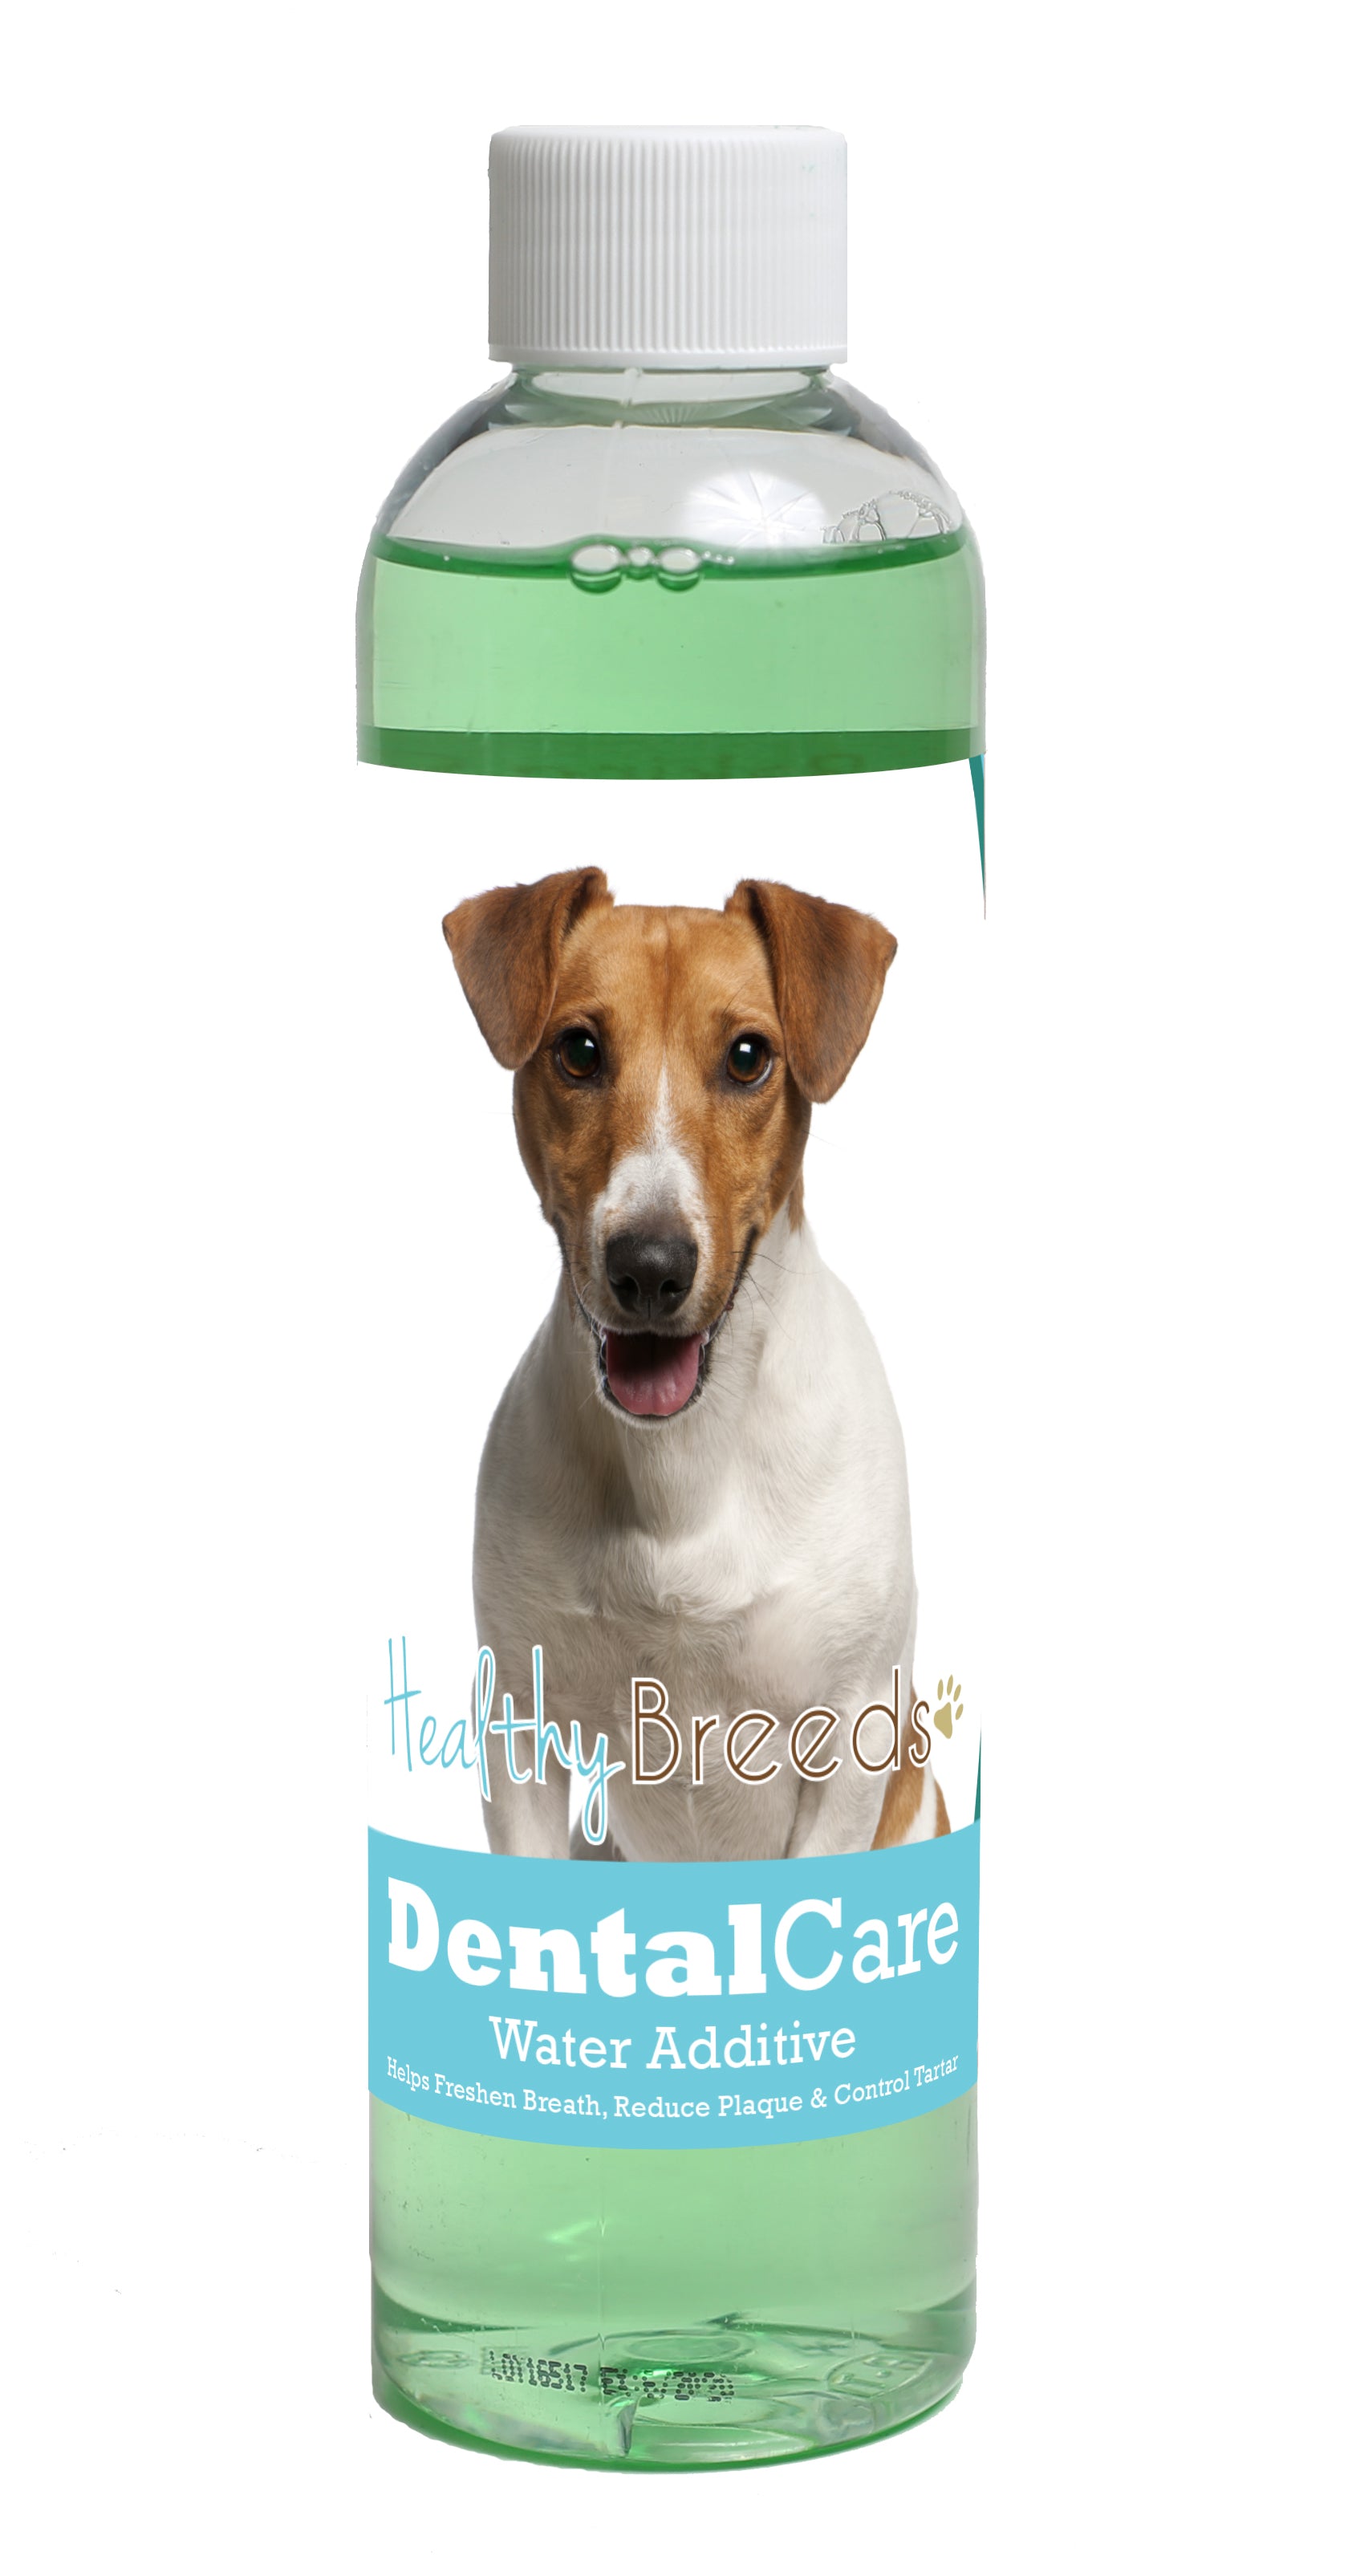 Jack Russell Terrier Dental Rinse for Dogs 8 oz